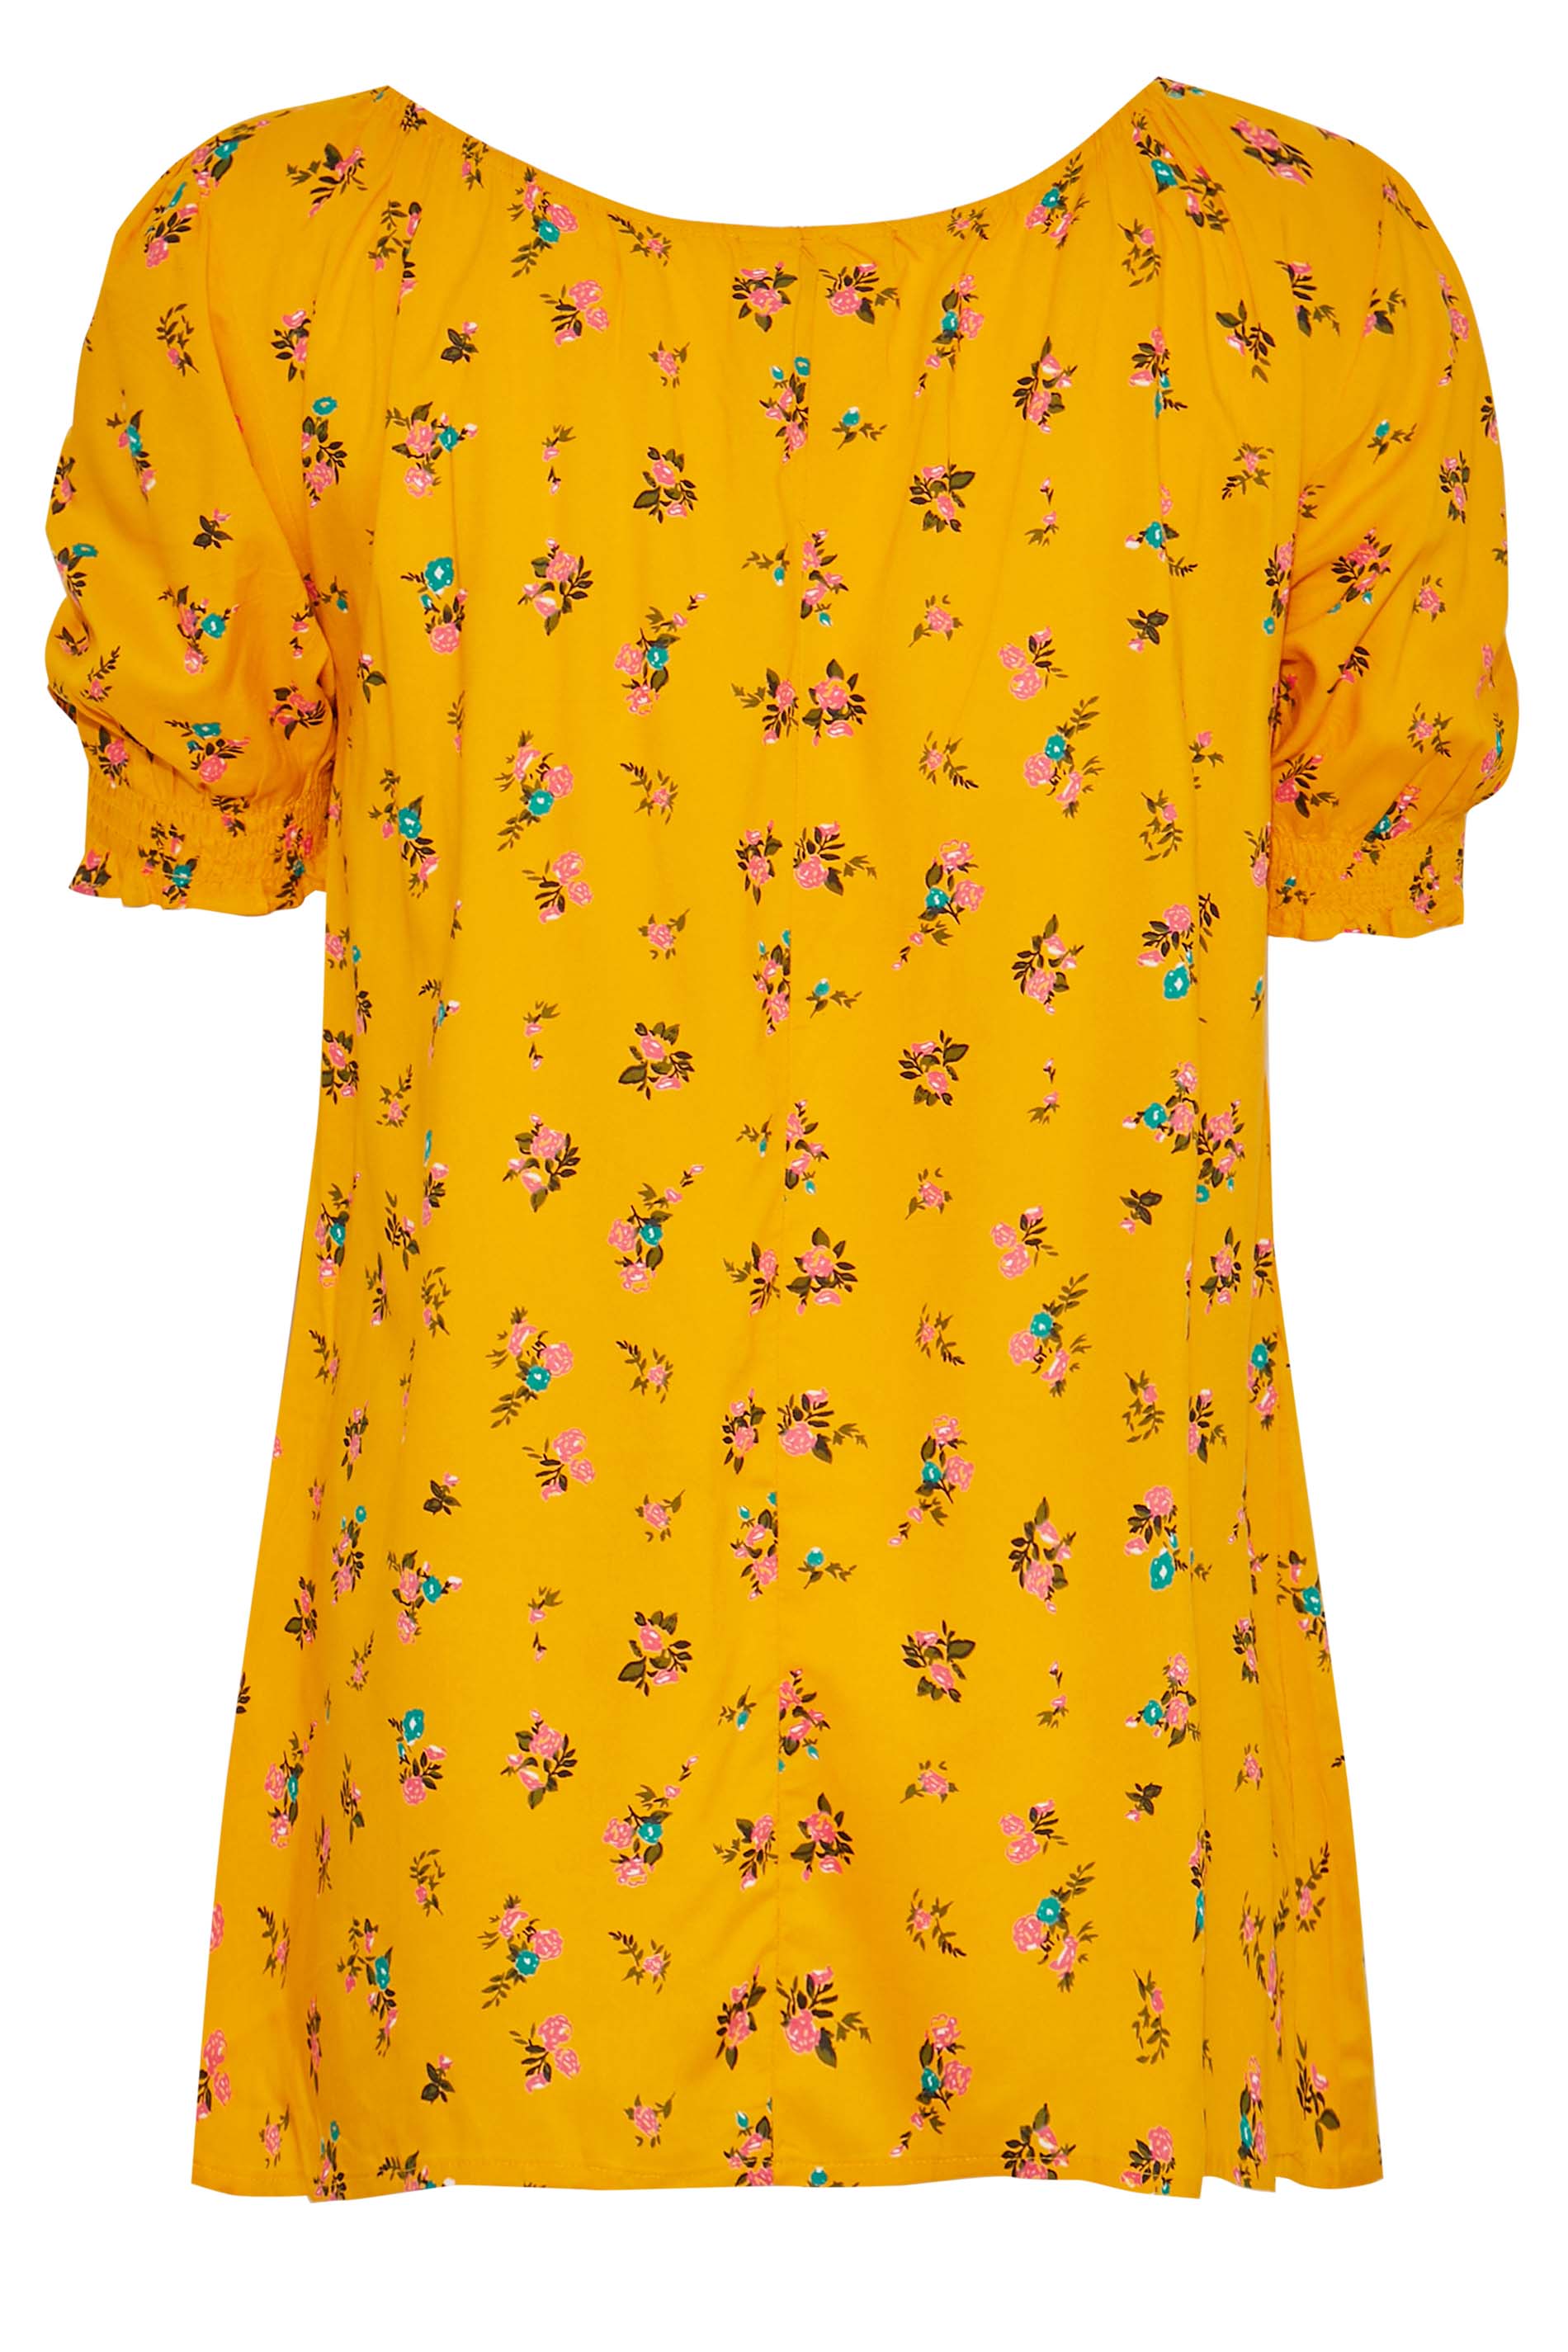 Grande taille  Tops Grande taille  Tops Bohèmes | Curve Mustard Yellow Floral Gypsy Top - XK32286